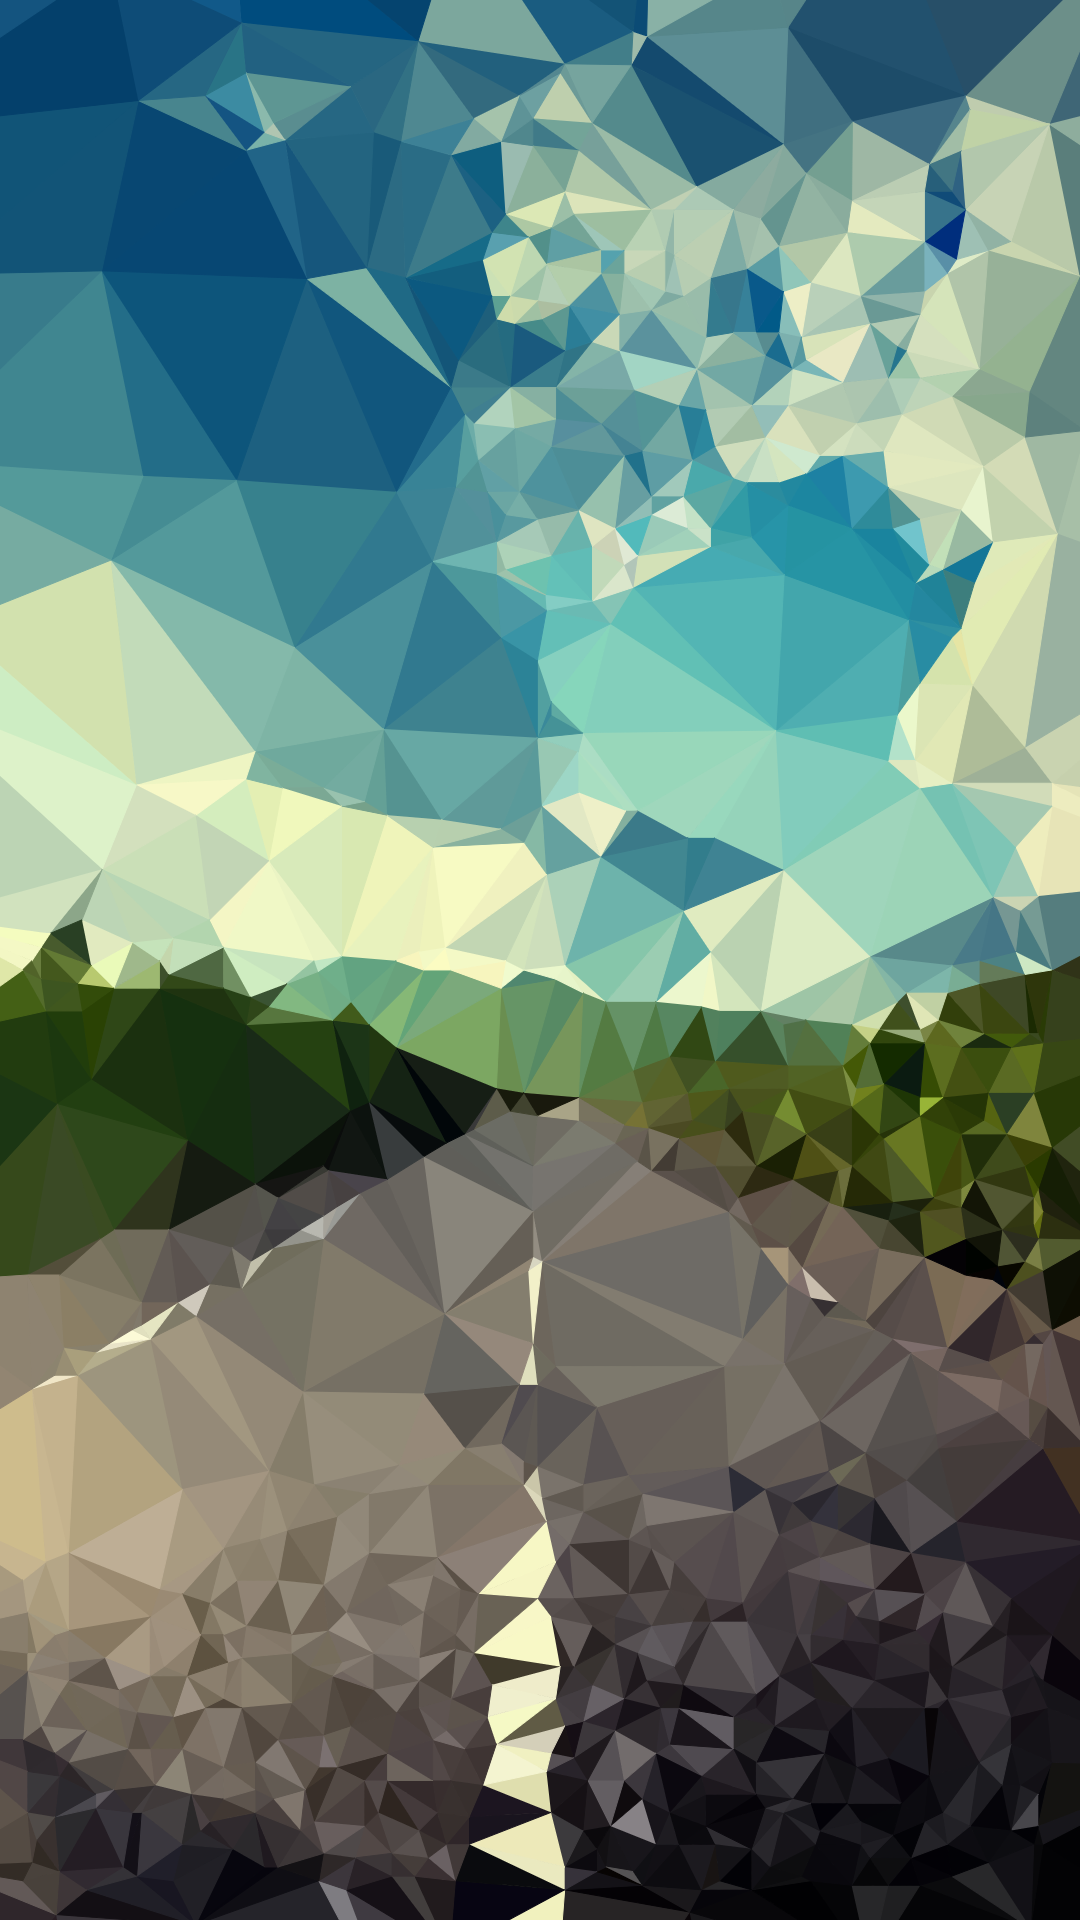 Landscape Road Polygon Apple iPhone HD Wallpaper Available For